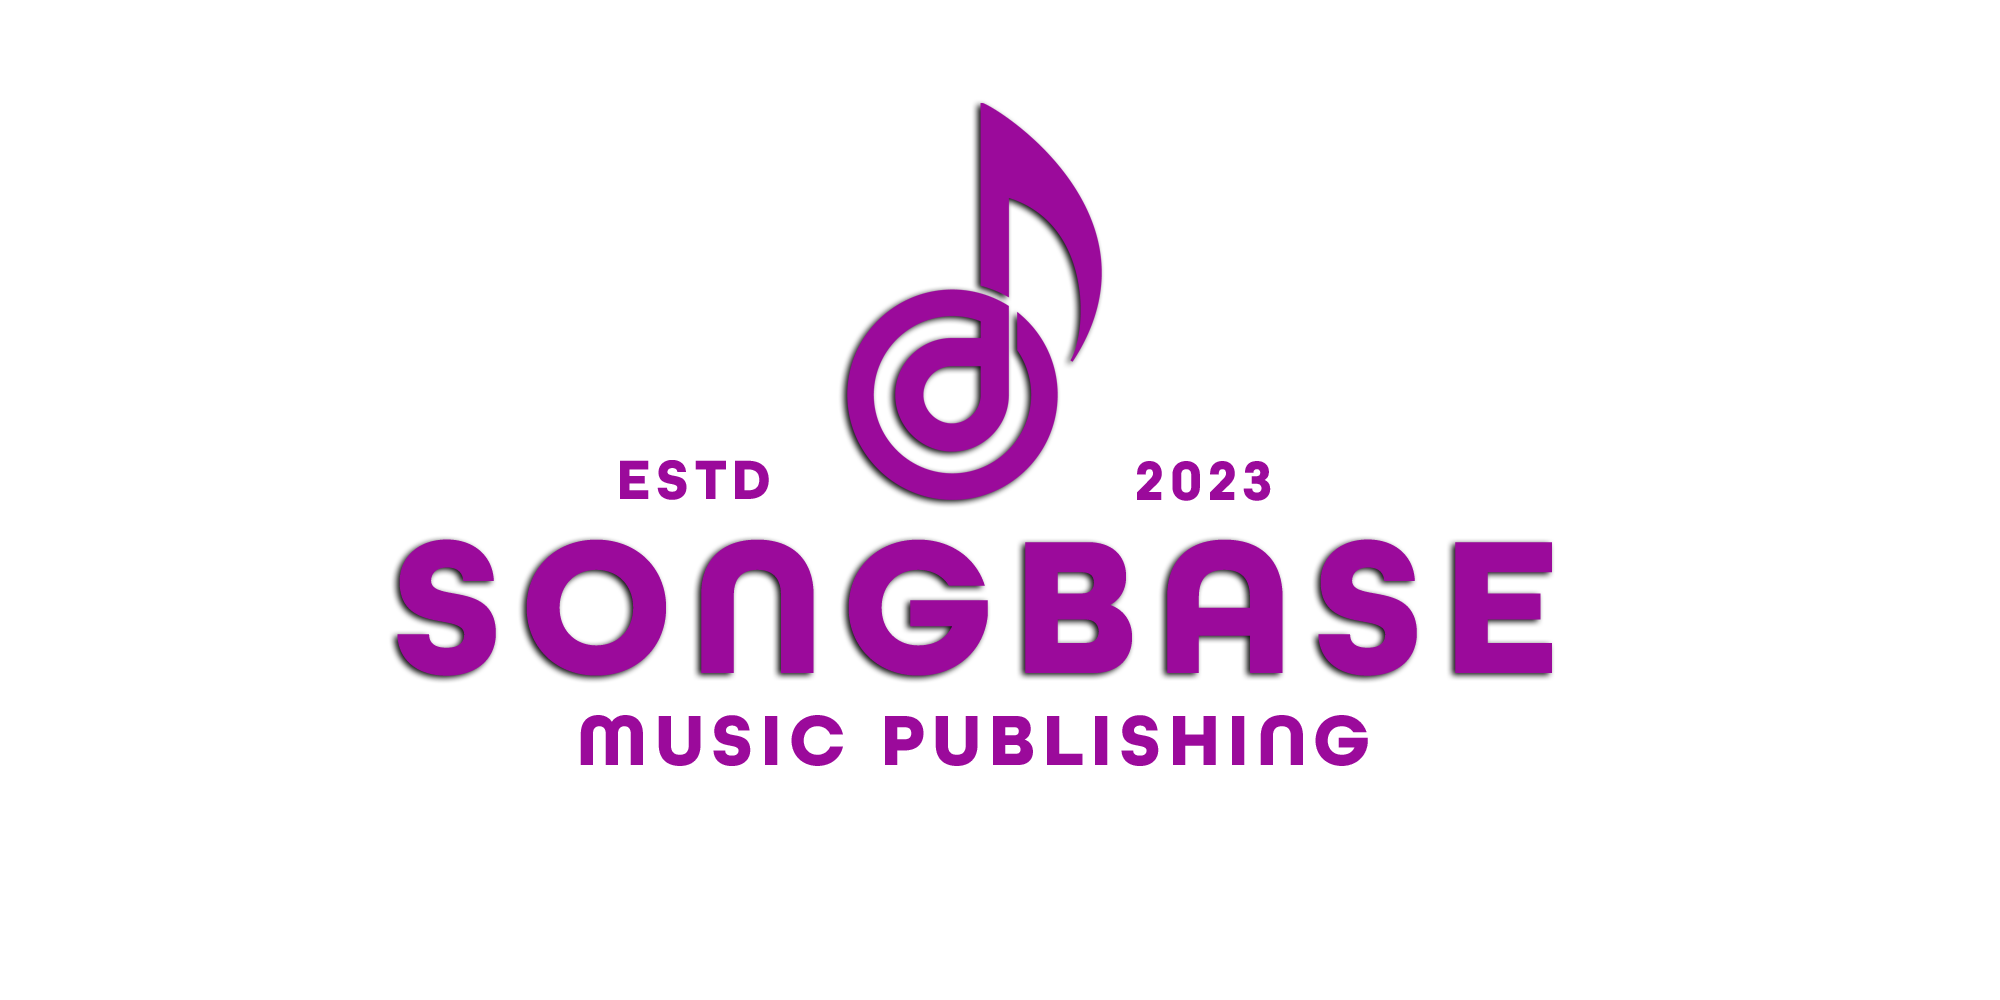 Welcome to Songbase